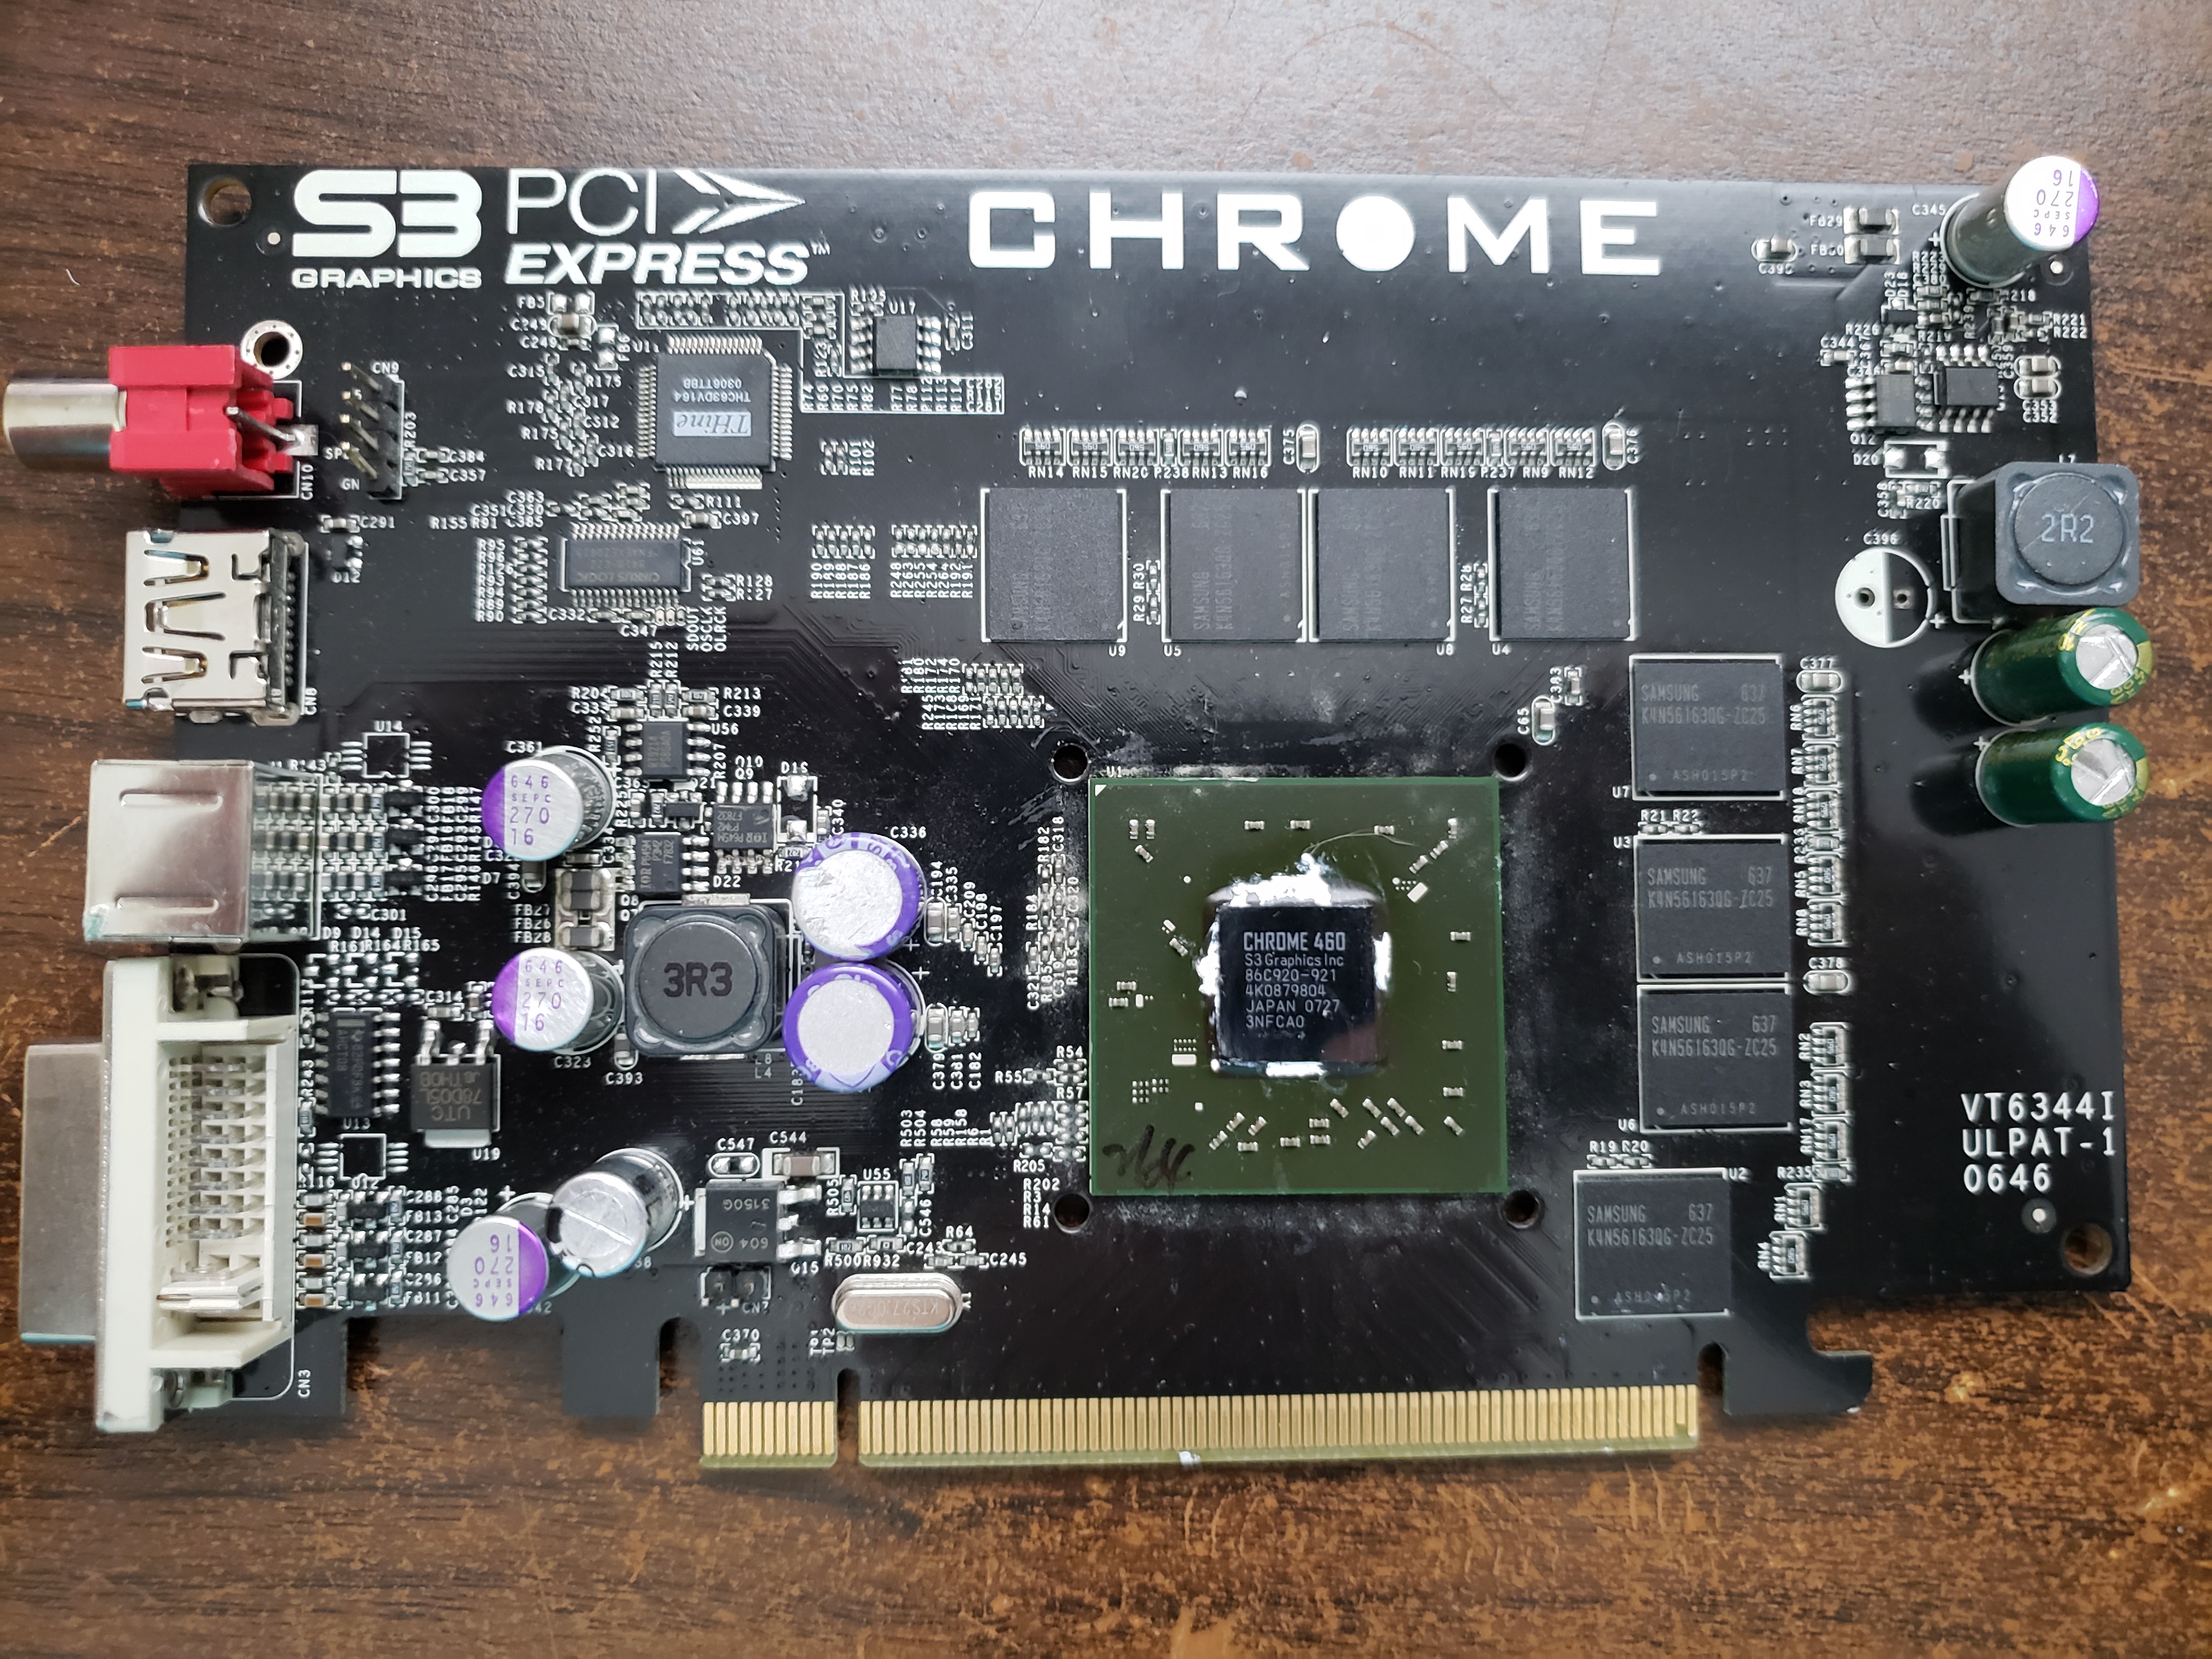 An S3 Chrome 460 Engineering Sample graphics card. One of the only three known to exist.